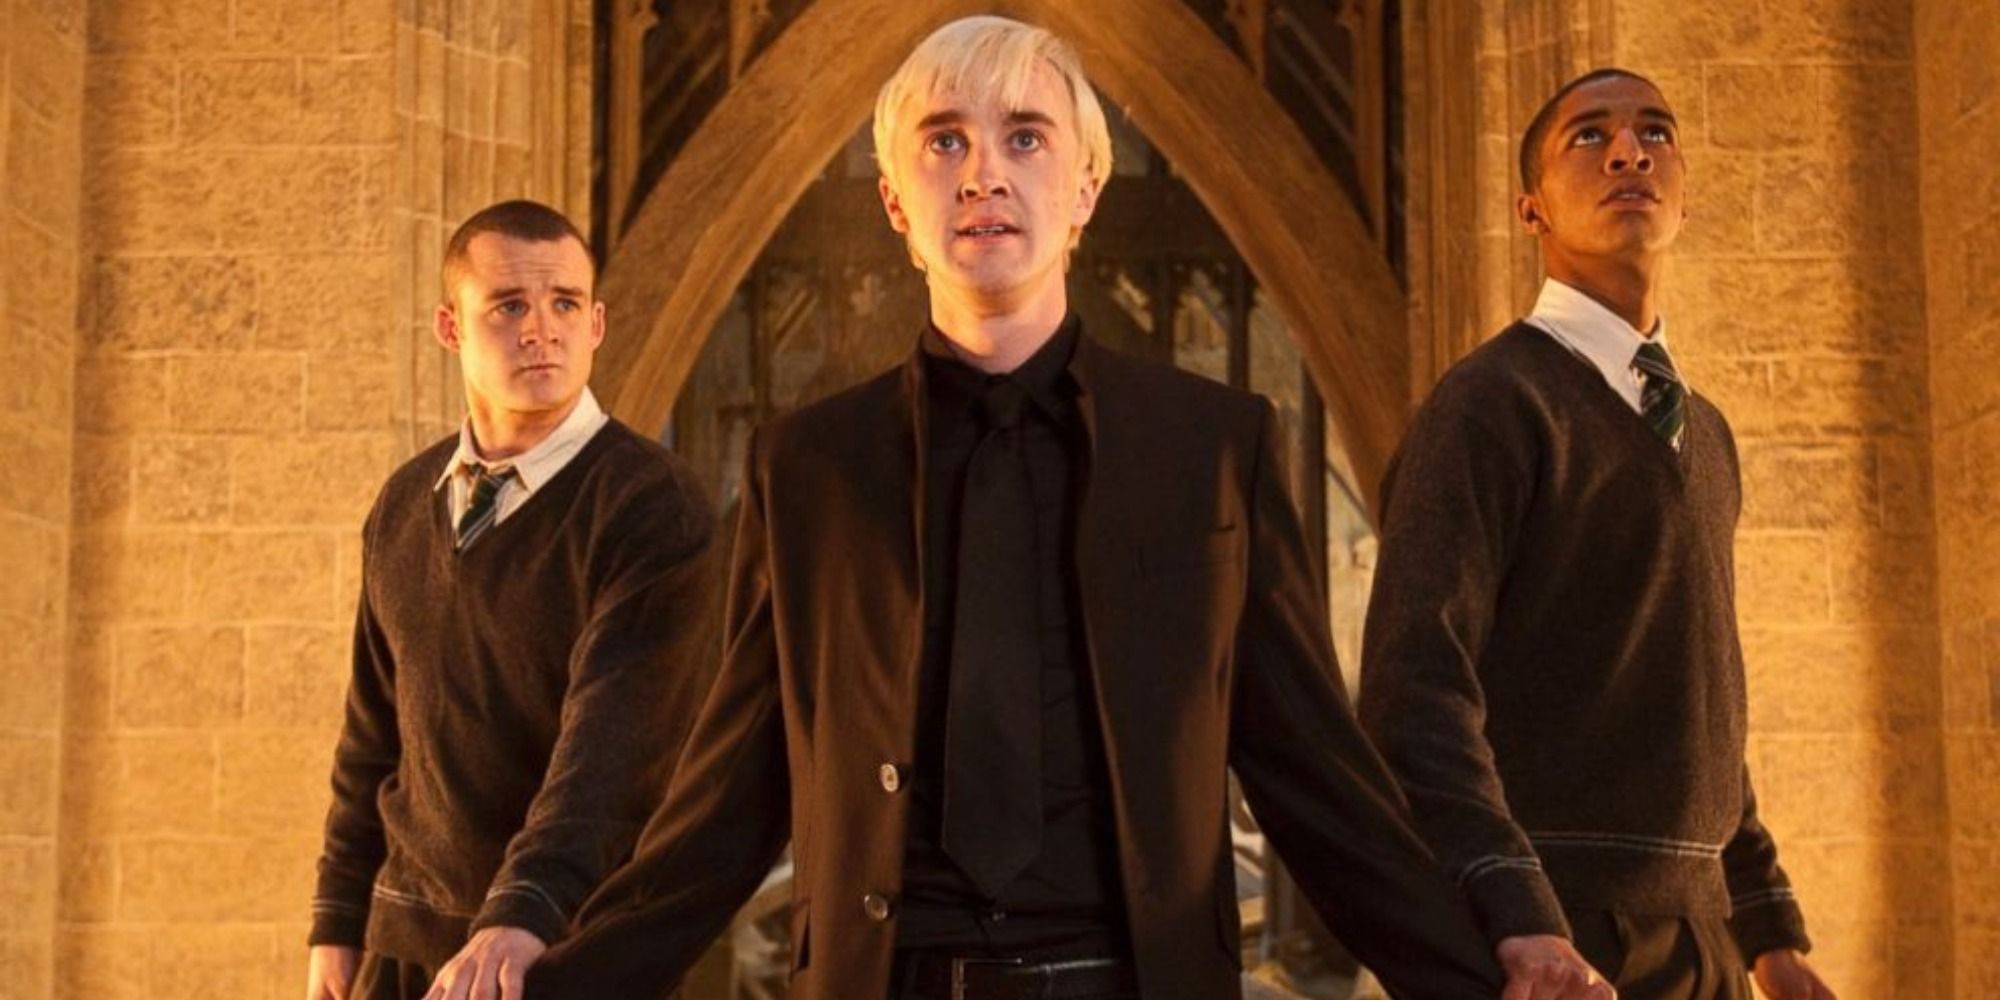 A screenshot of Draco Malfoy, Gregory Goyle and Blaise Zabini stumbling upon the Room of Requirement in Harry Potter and the Deathly Hallows - Part 2